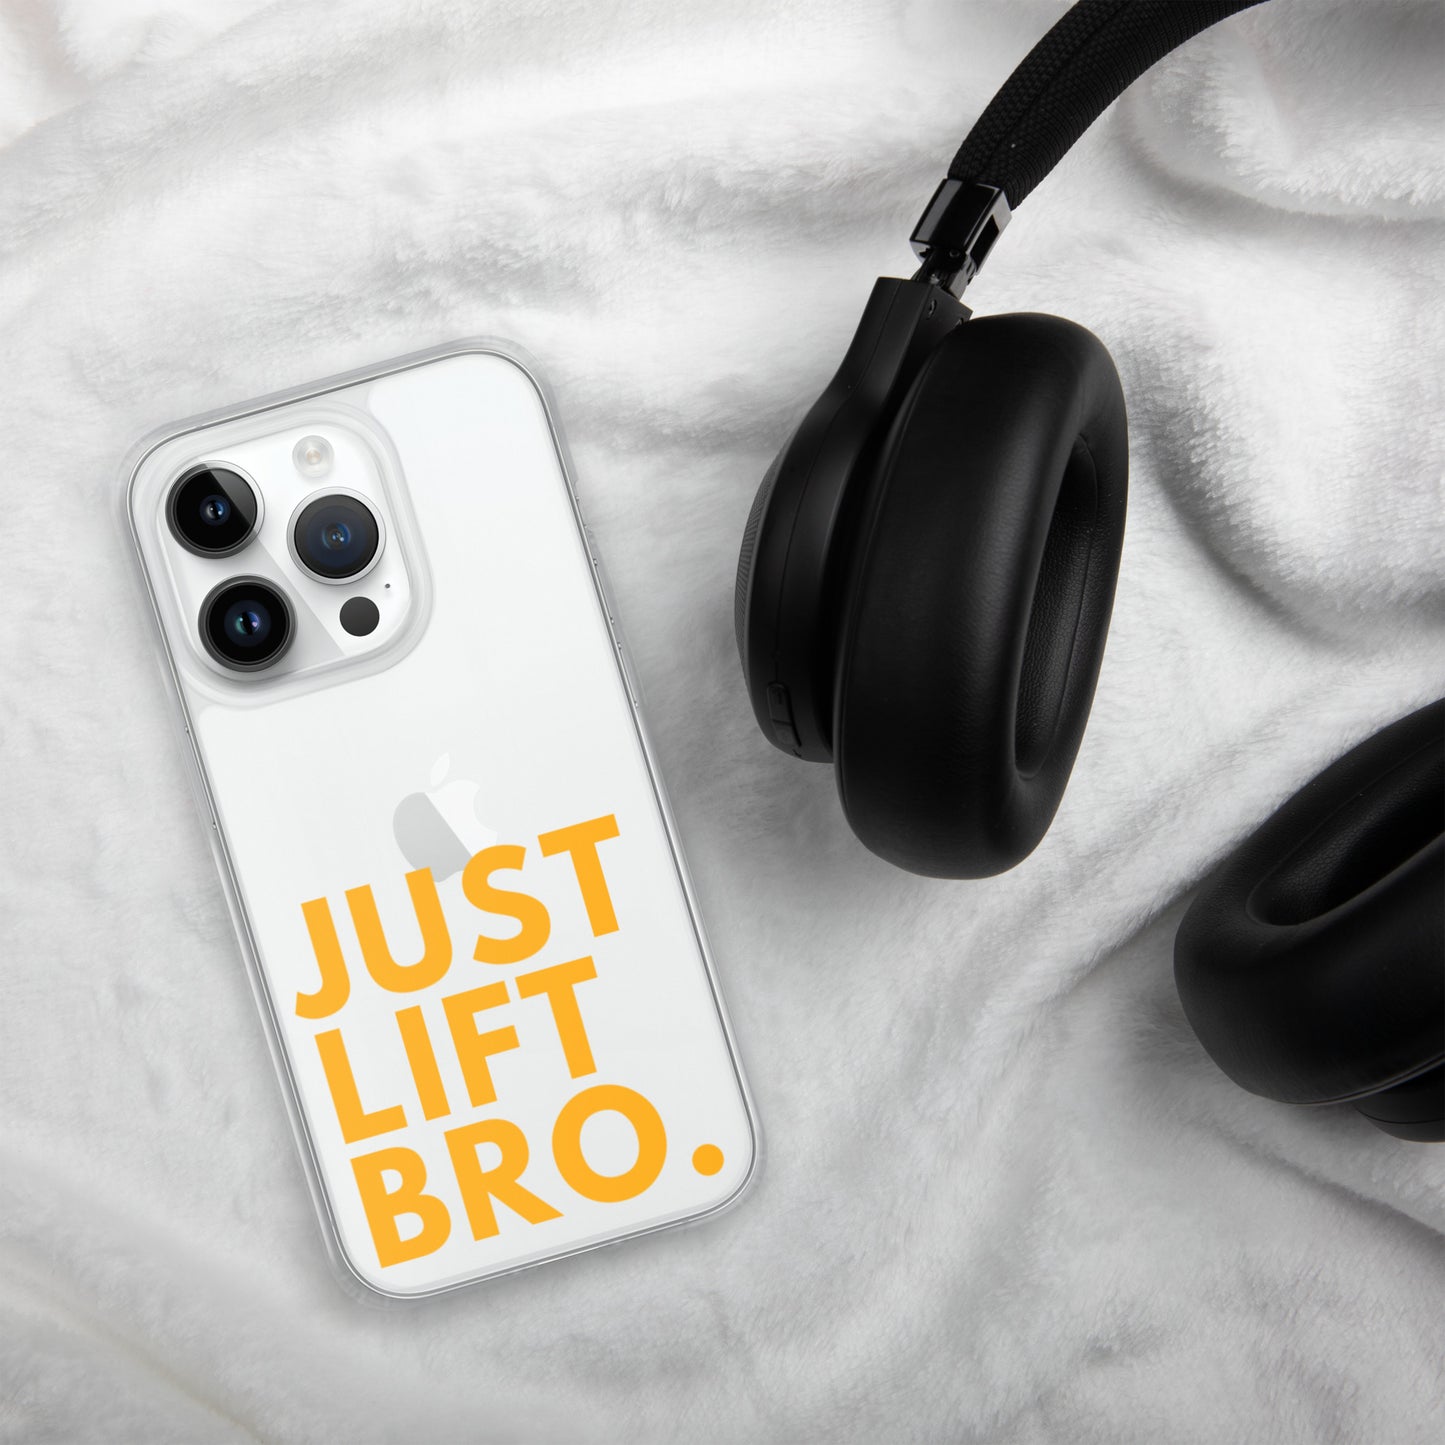 Just Lift Bro. Clear iPhone Case